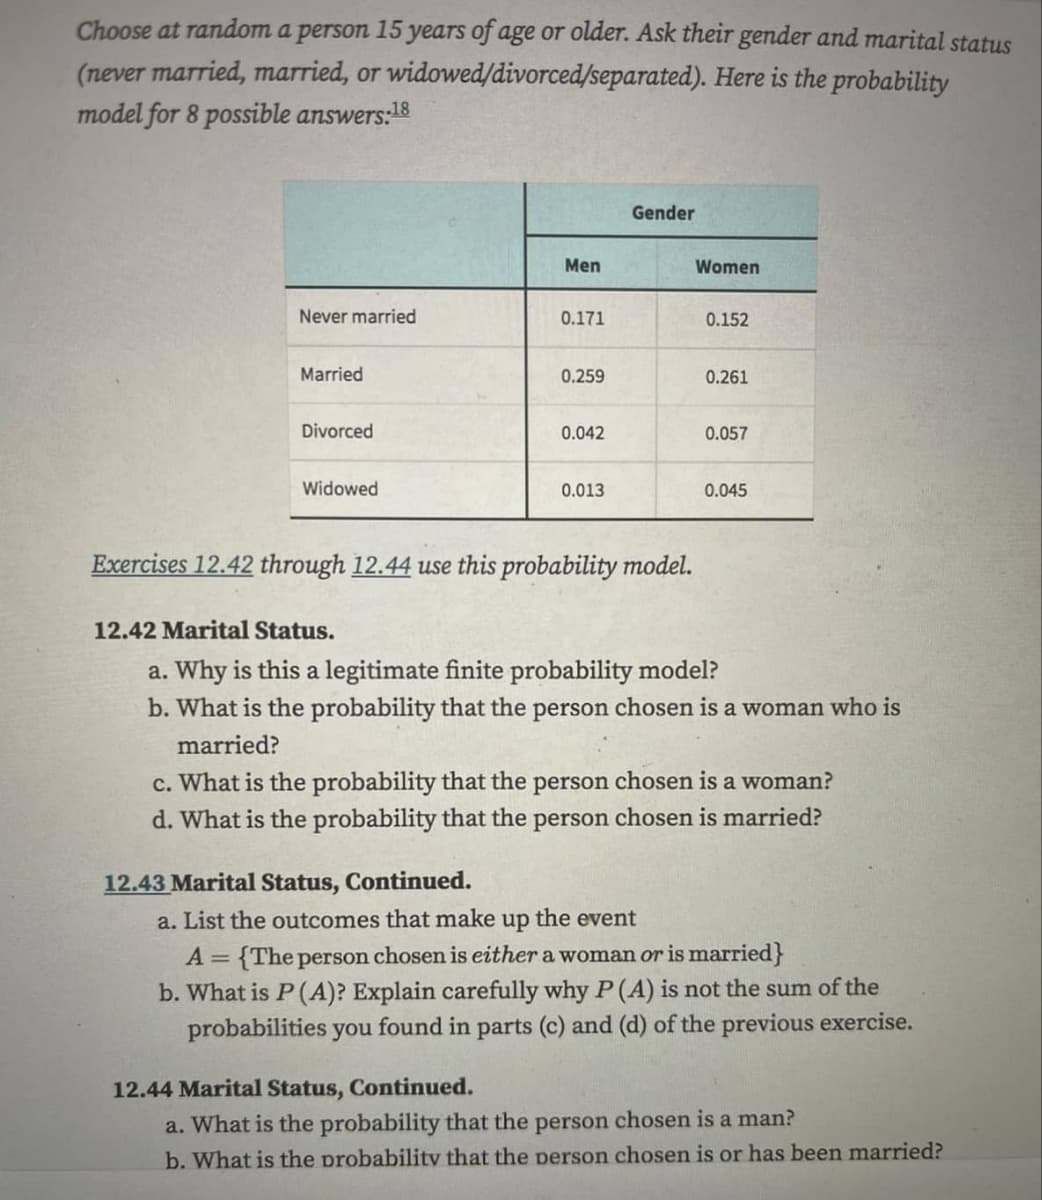 Choose at random a person 15 years of age or older. Ask their gender and marital status
(never married, married, or widowed/divorced/separated). Here is the probability
model for 8 possible answers:18
Never married
Married
Divorced
Widowed
Men
0.171
0.259
12.43 Marital Status, Continued.
0.042
0.013
Gender
Exercises 12.42 through 12.44 use this probability model.
Women
0.152
0.261
0.057
0.045
12.42 Marital Status.
a. Why is this a legitimate finite probability model?
b. What is the probability that the person chosen is a woman who is
married?
c. What is the probability that the person chosen is a woman?
d. What is the probability that the person chosen is married?
a. List the outcomes that make up the event
A = {The person chosen is either a woman or is married}
b. What is P (A)? Explain carefully why P (A) is not the sum of the
probabilities you found in parts (c) and (d) of the previous exercise.
12.44 Marital Status, Continued.
a. What is the probability that the person chosen is a man?
b. What is the probability that the person chosen is or has been married?